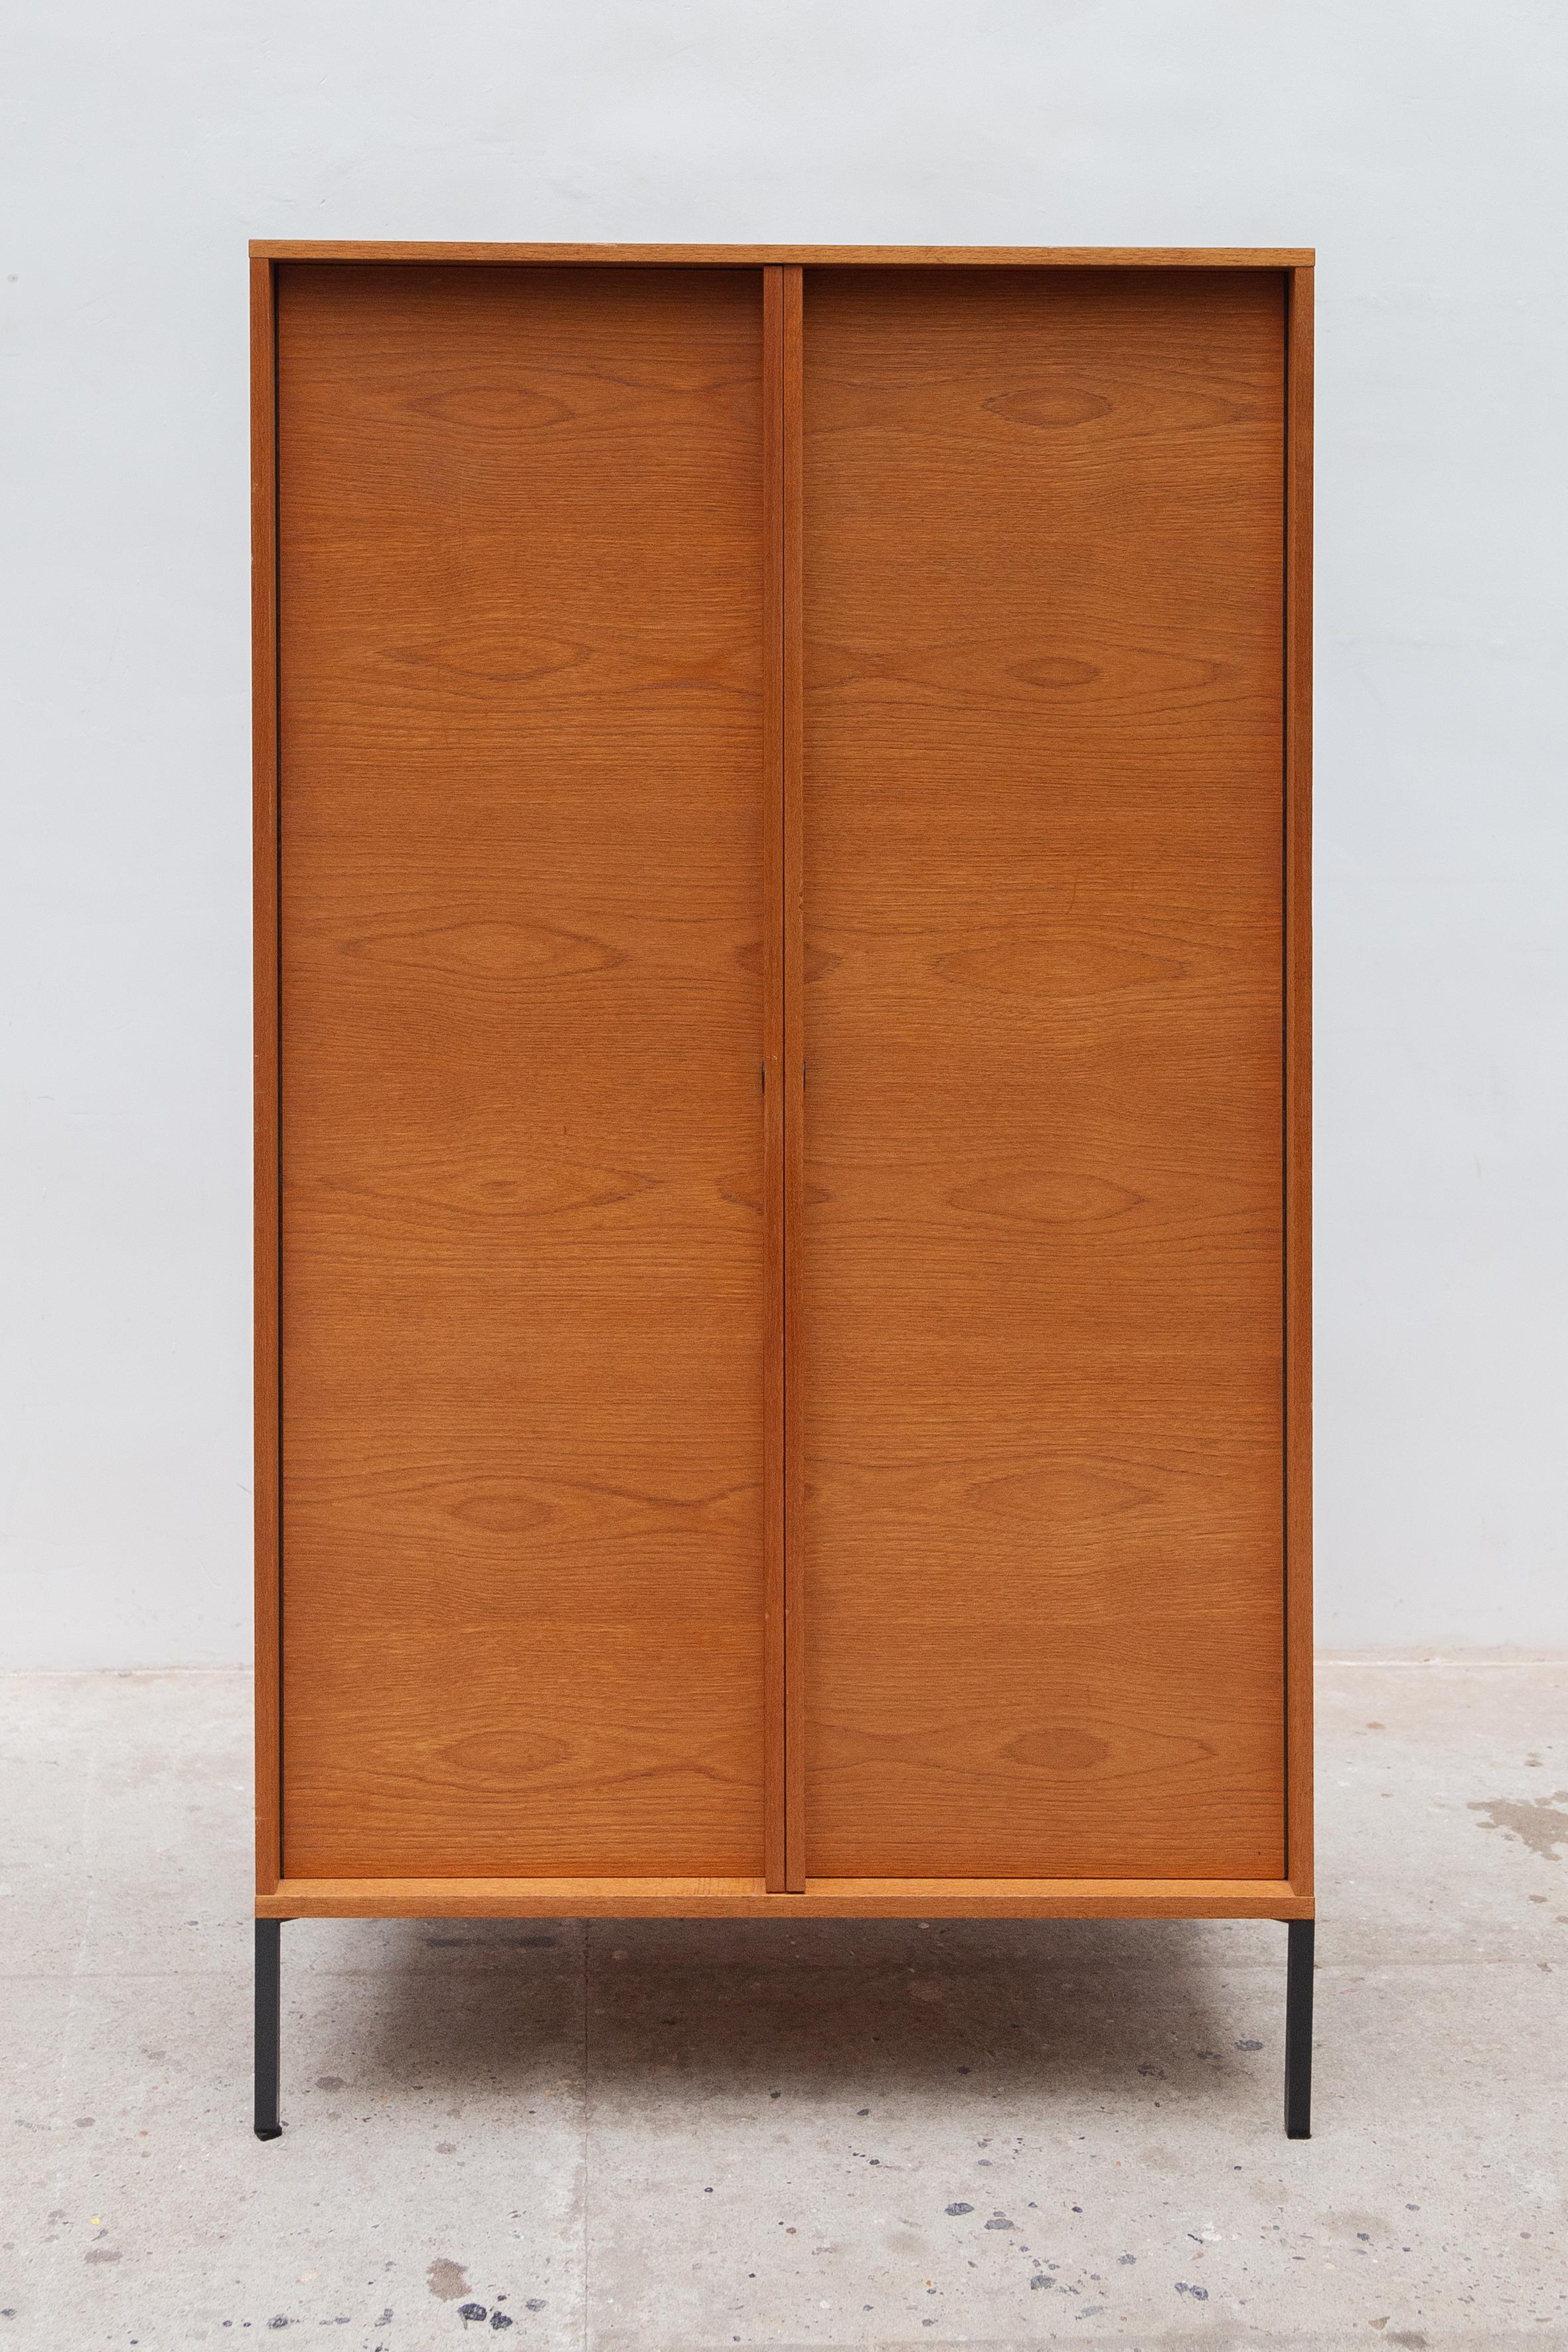 Hand-Crafted Large Minimalist Wardrobe, Cabinet designed by Gunther Renkel, for Rego, 1960s